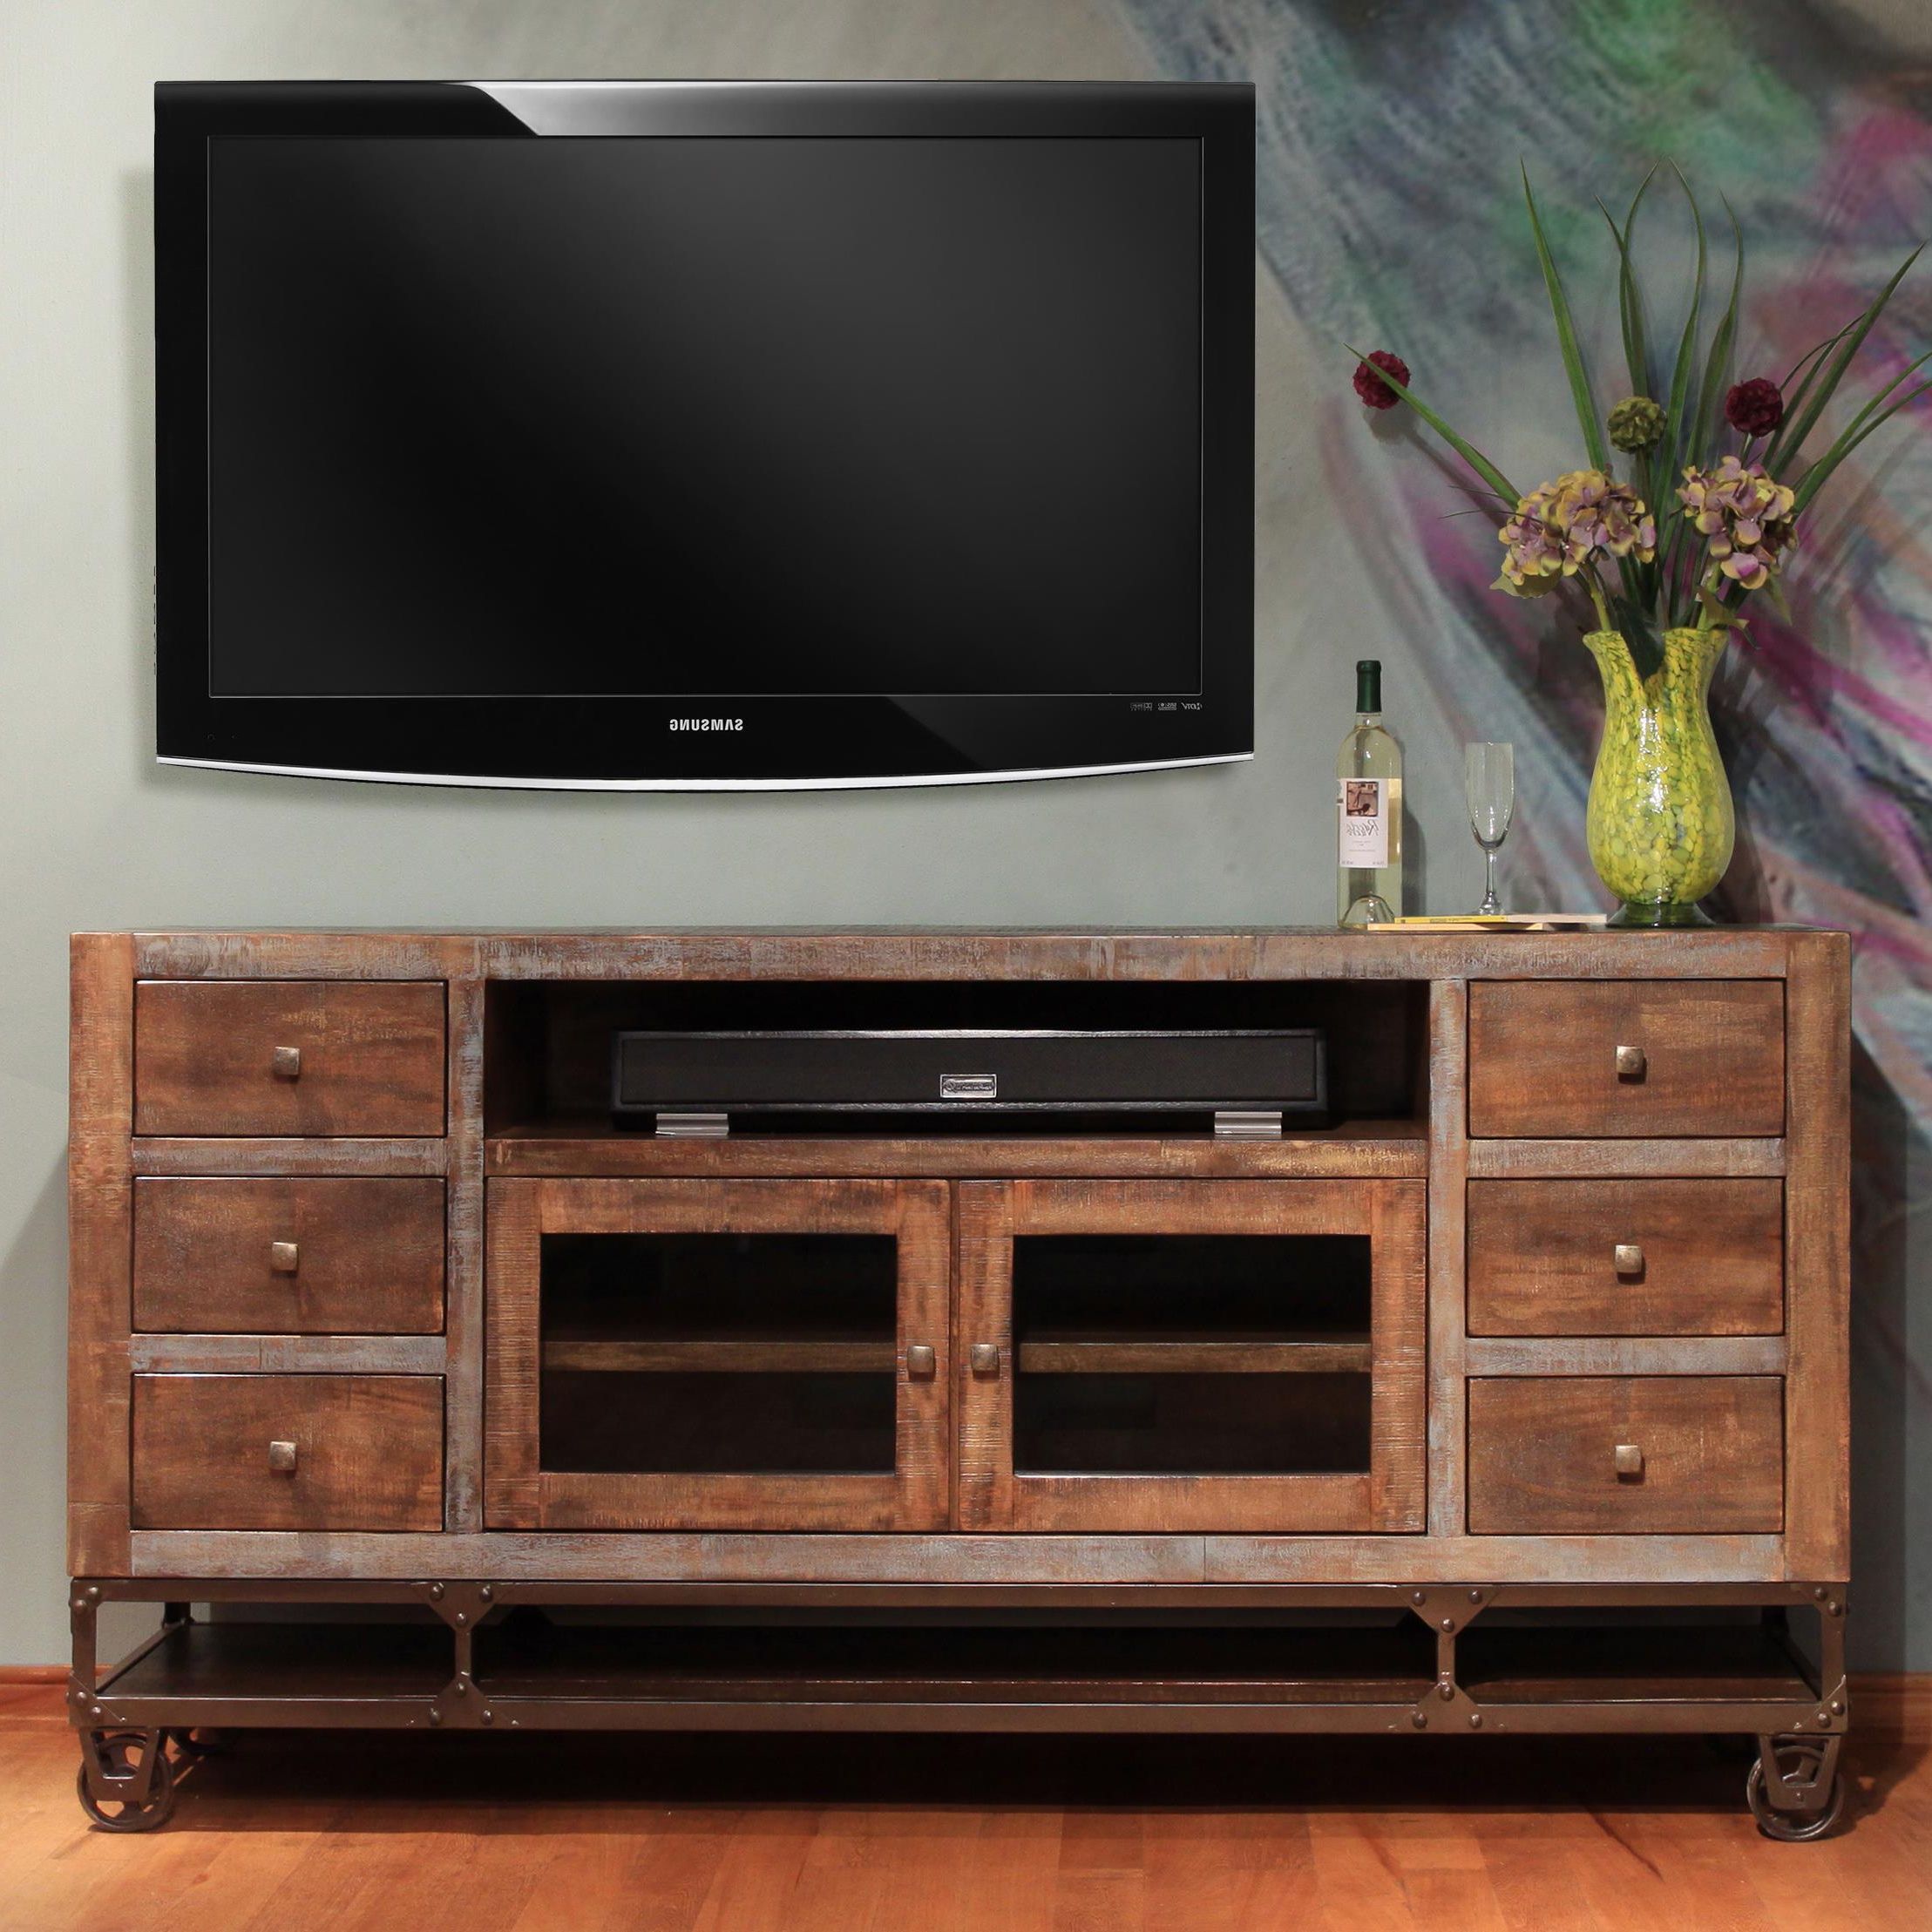 Artisan Home Urban Gold 76" Solid Wood Tv Stand | Suburban Within Dillon Tv Stands Oak (Gallery 2 of 20)